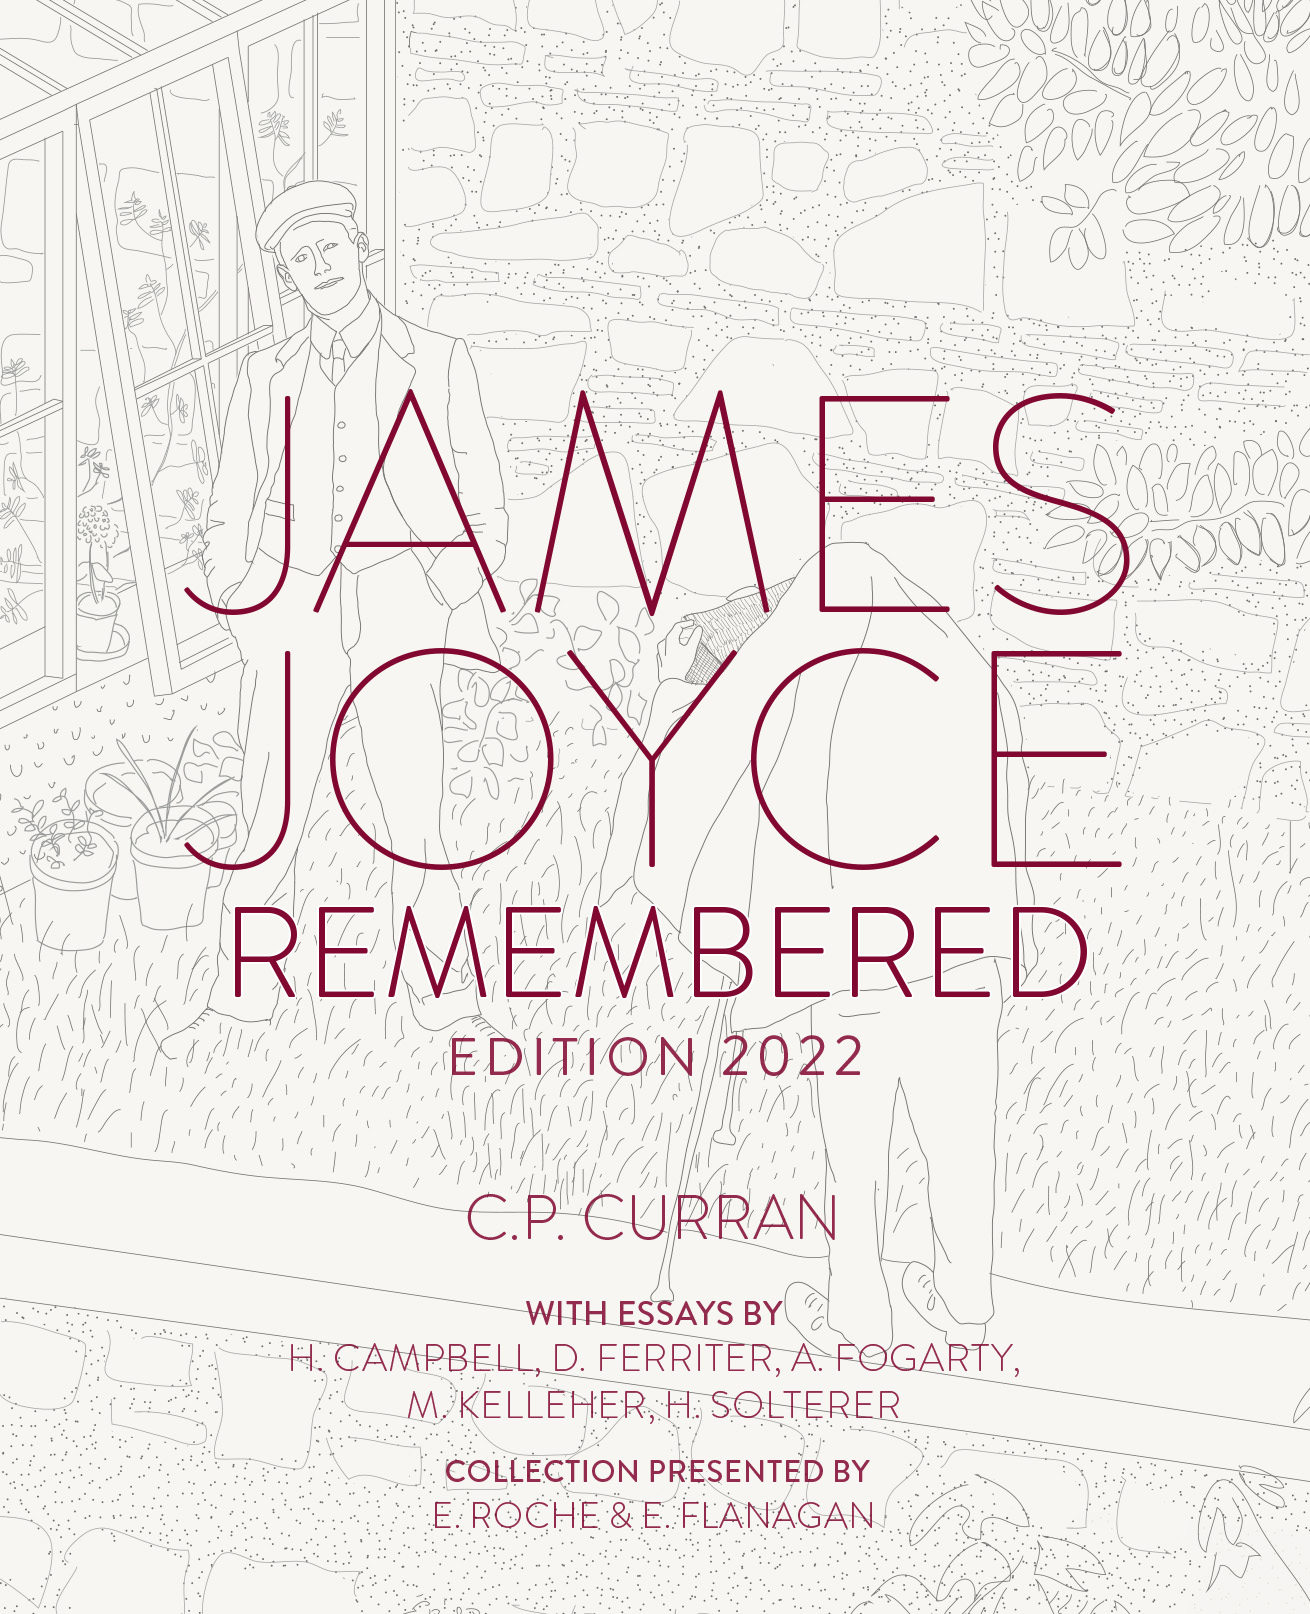 James Joyce Remembered Edition 2022 (Special Edition) Jacket Image